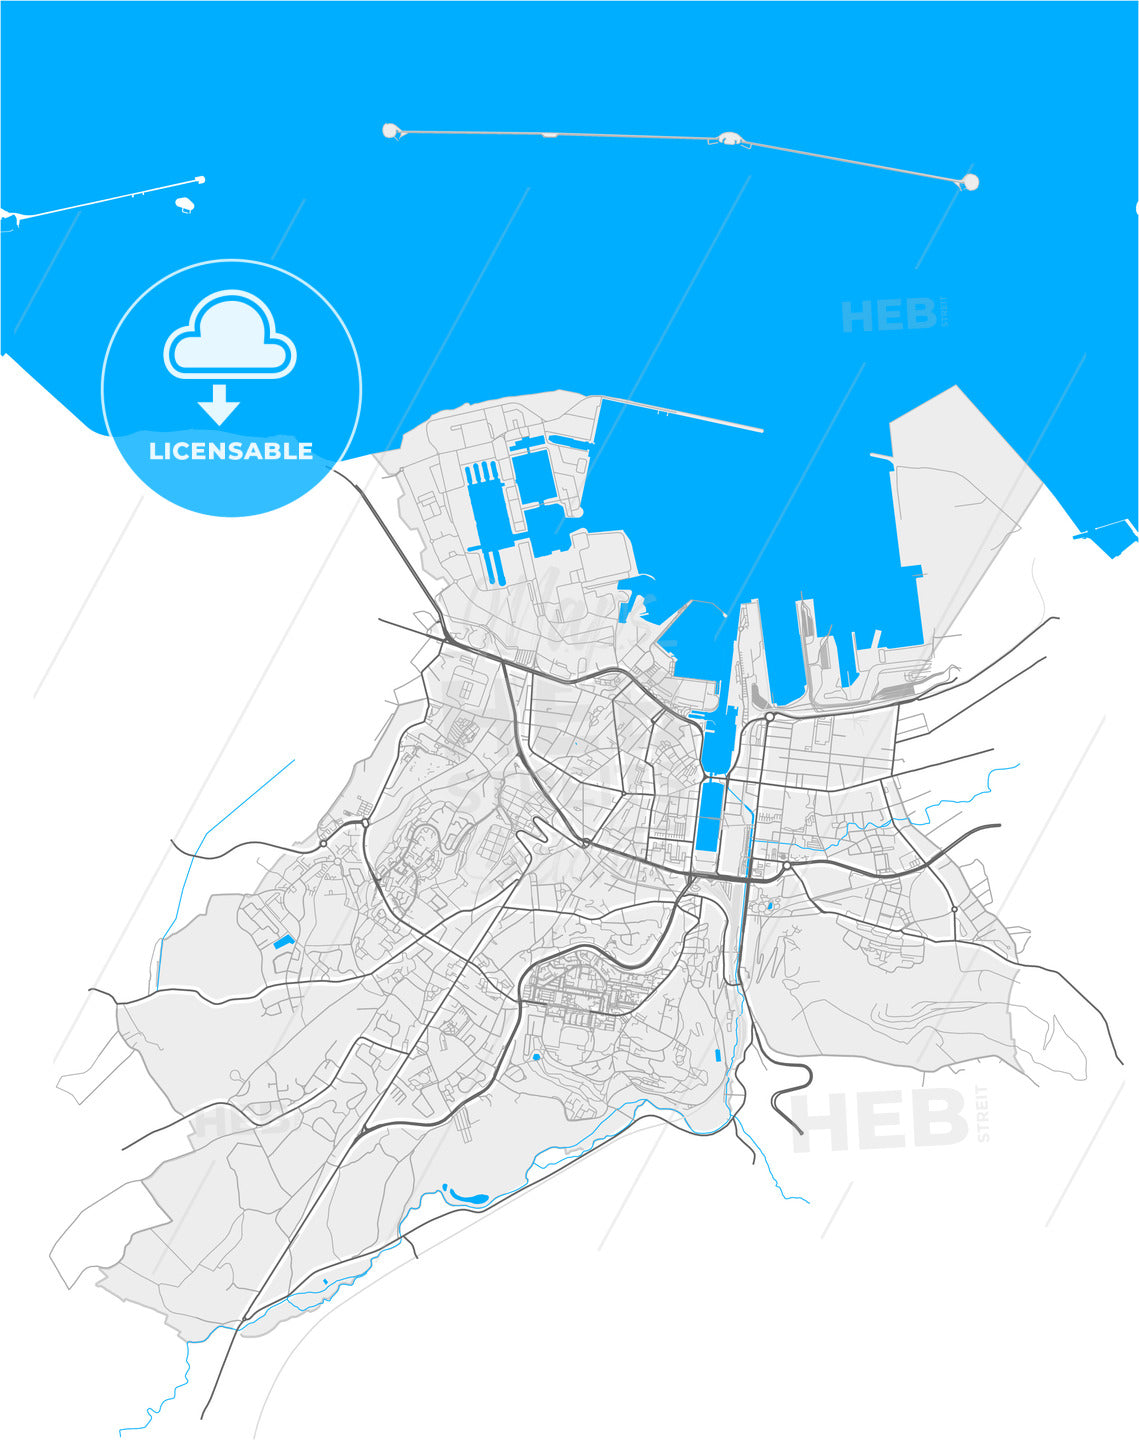 Cherbourg-Octeville, Manche, France, high quality vector map